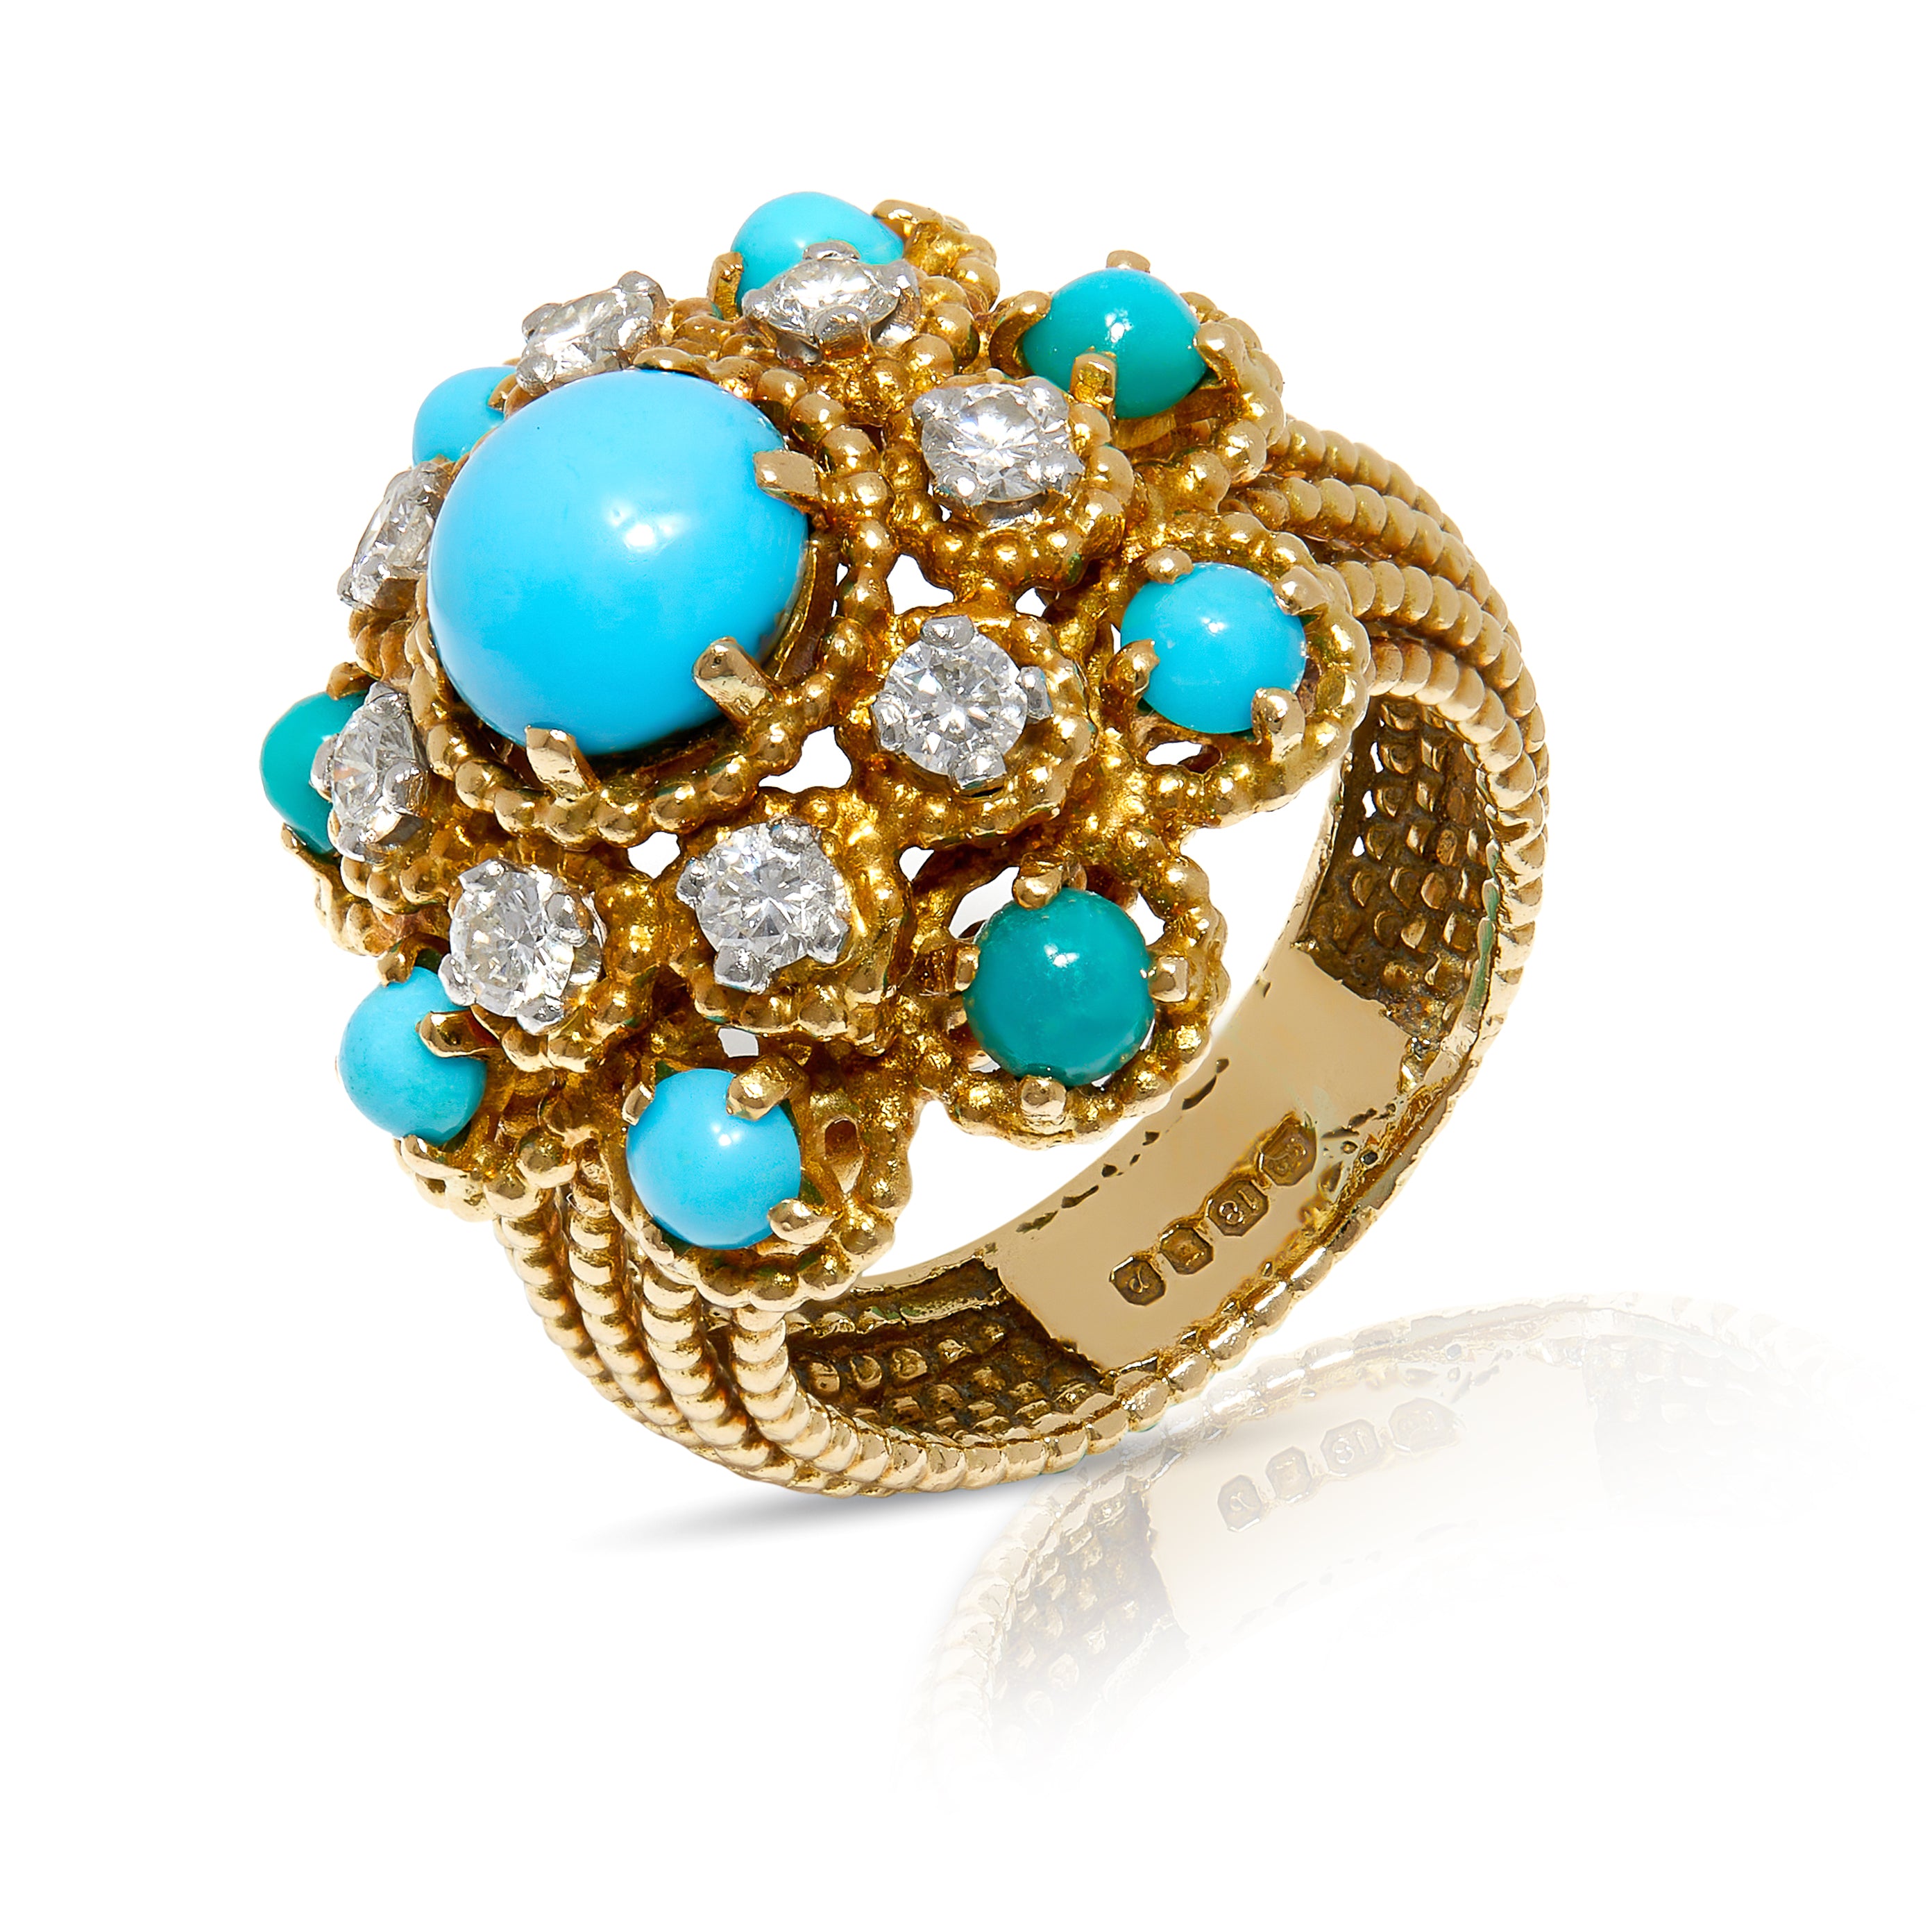 Vintage bombé dress ring with turquoise cabochons and diamonds. 